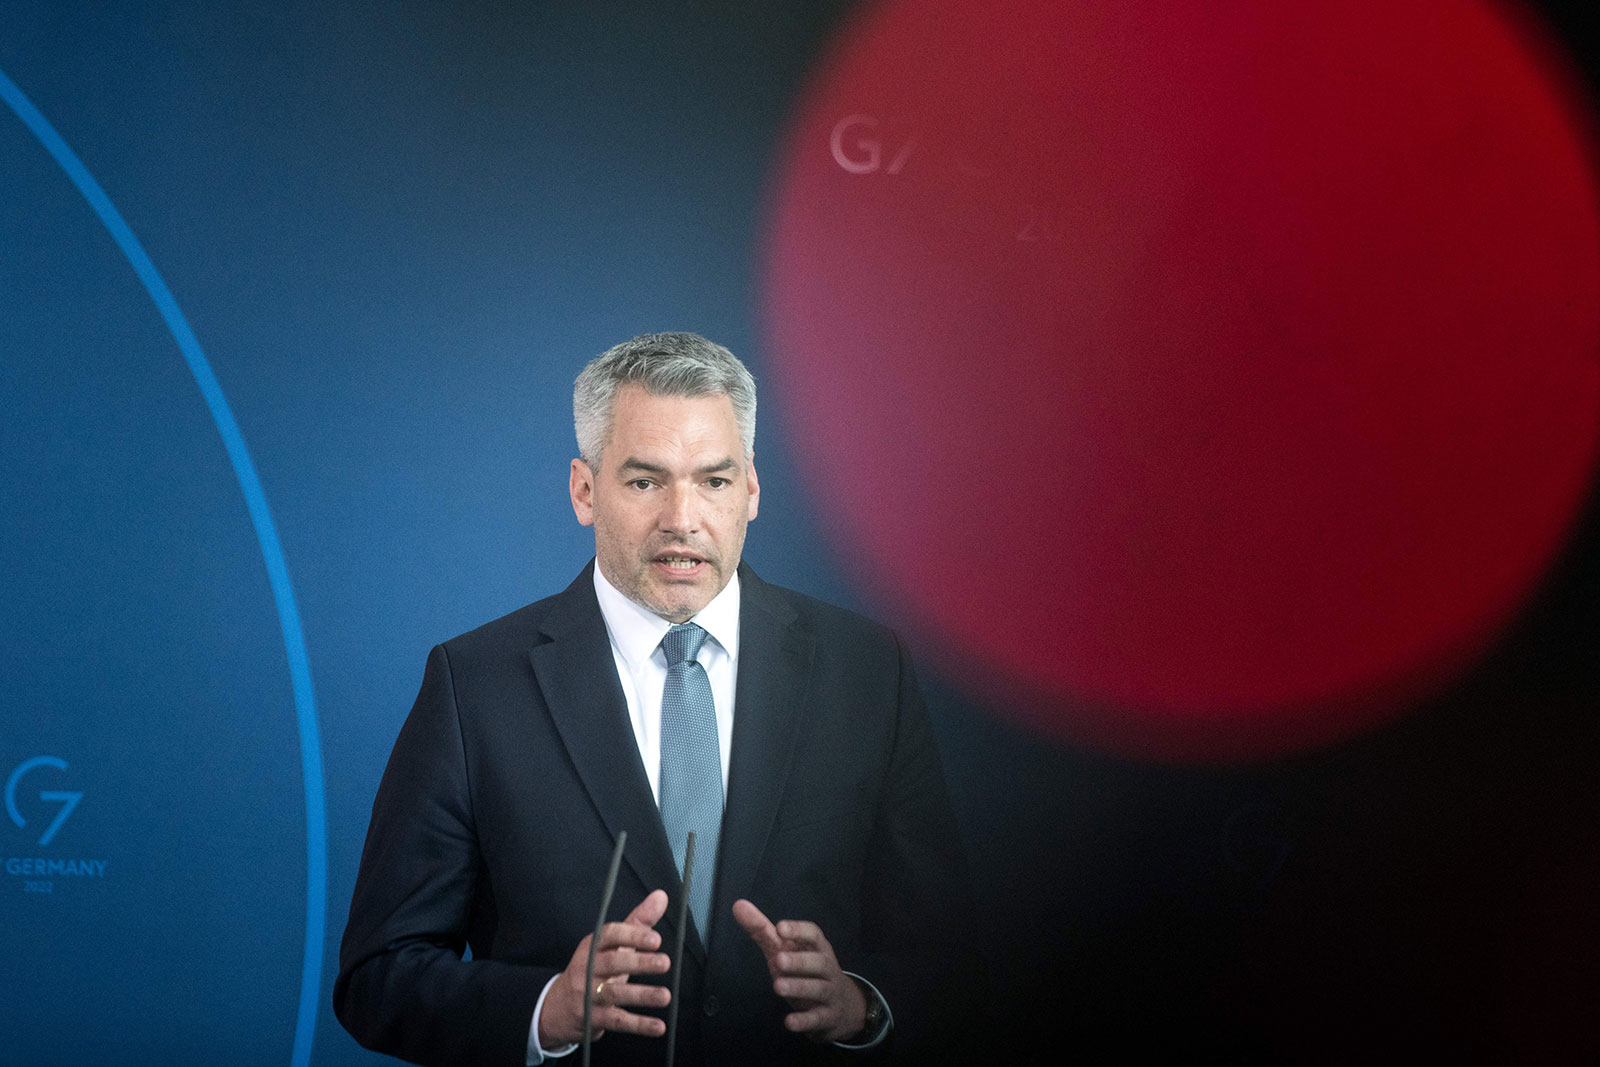 Austrian Chancellor Karl Nehammer addresses a joint press conference in Berlin on March 31.